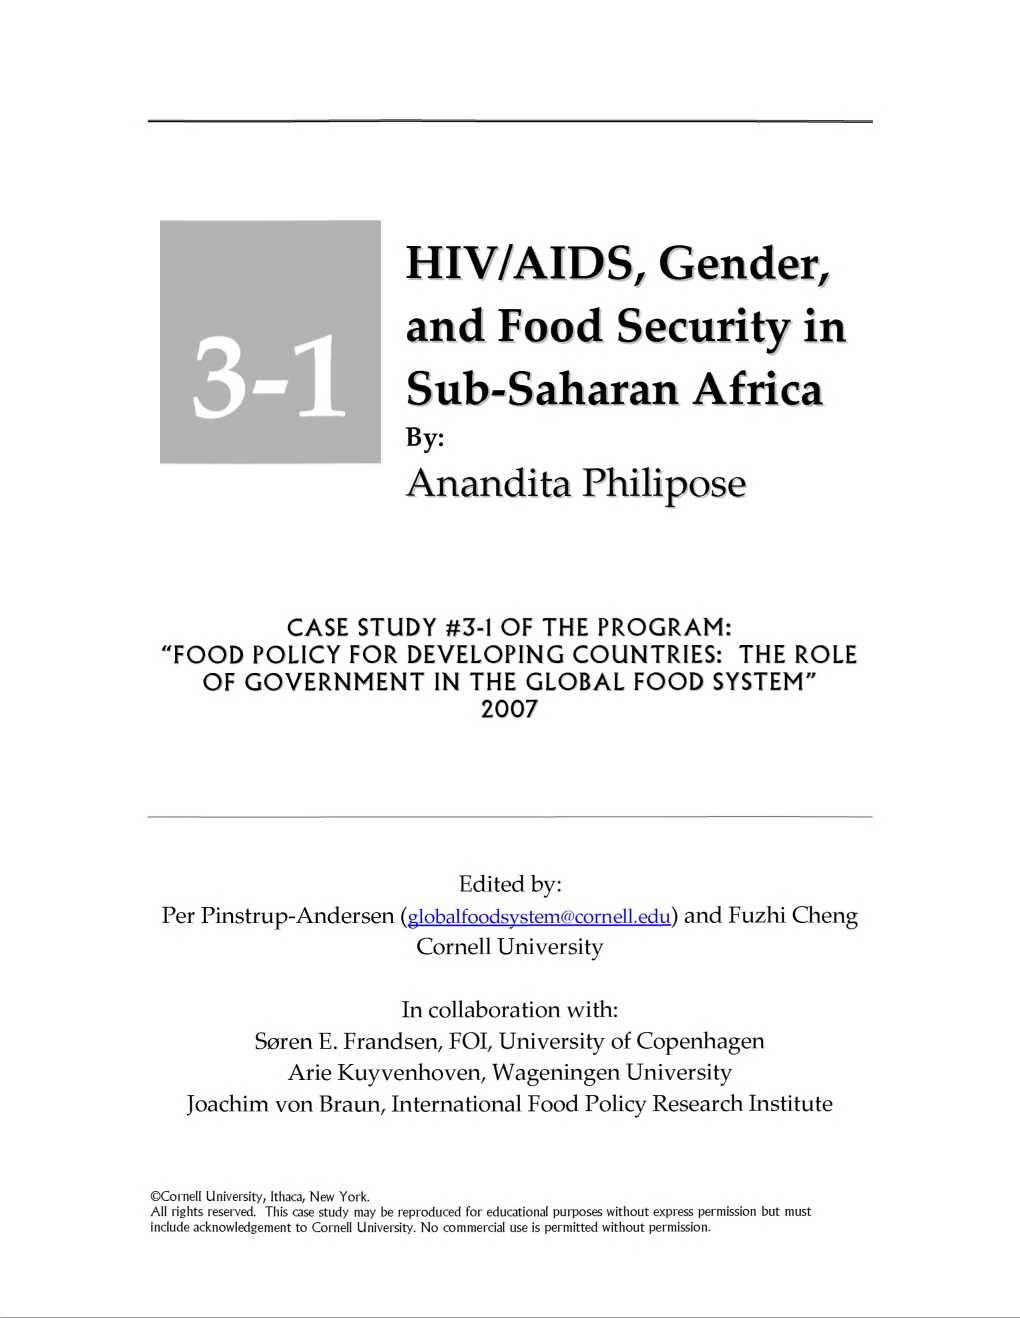 HIV/AIDS, Gender, and Food Security in Sub-Saharan Africa By: Anandita Phi Li Pose